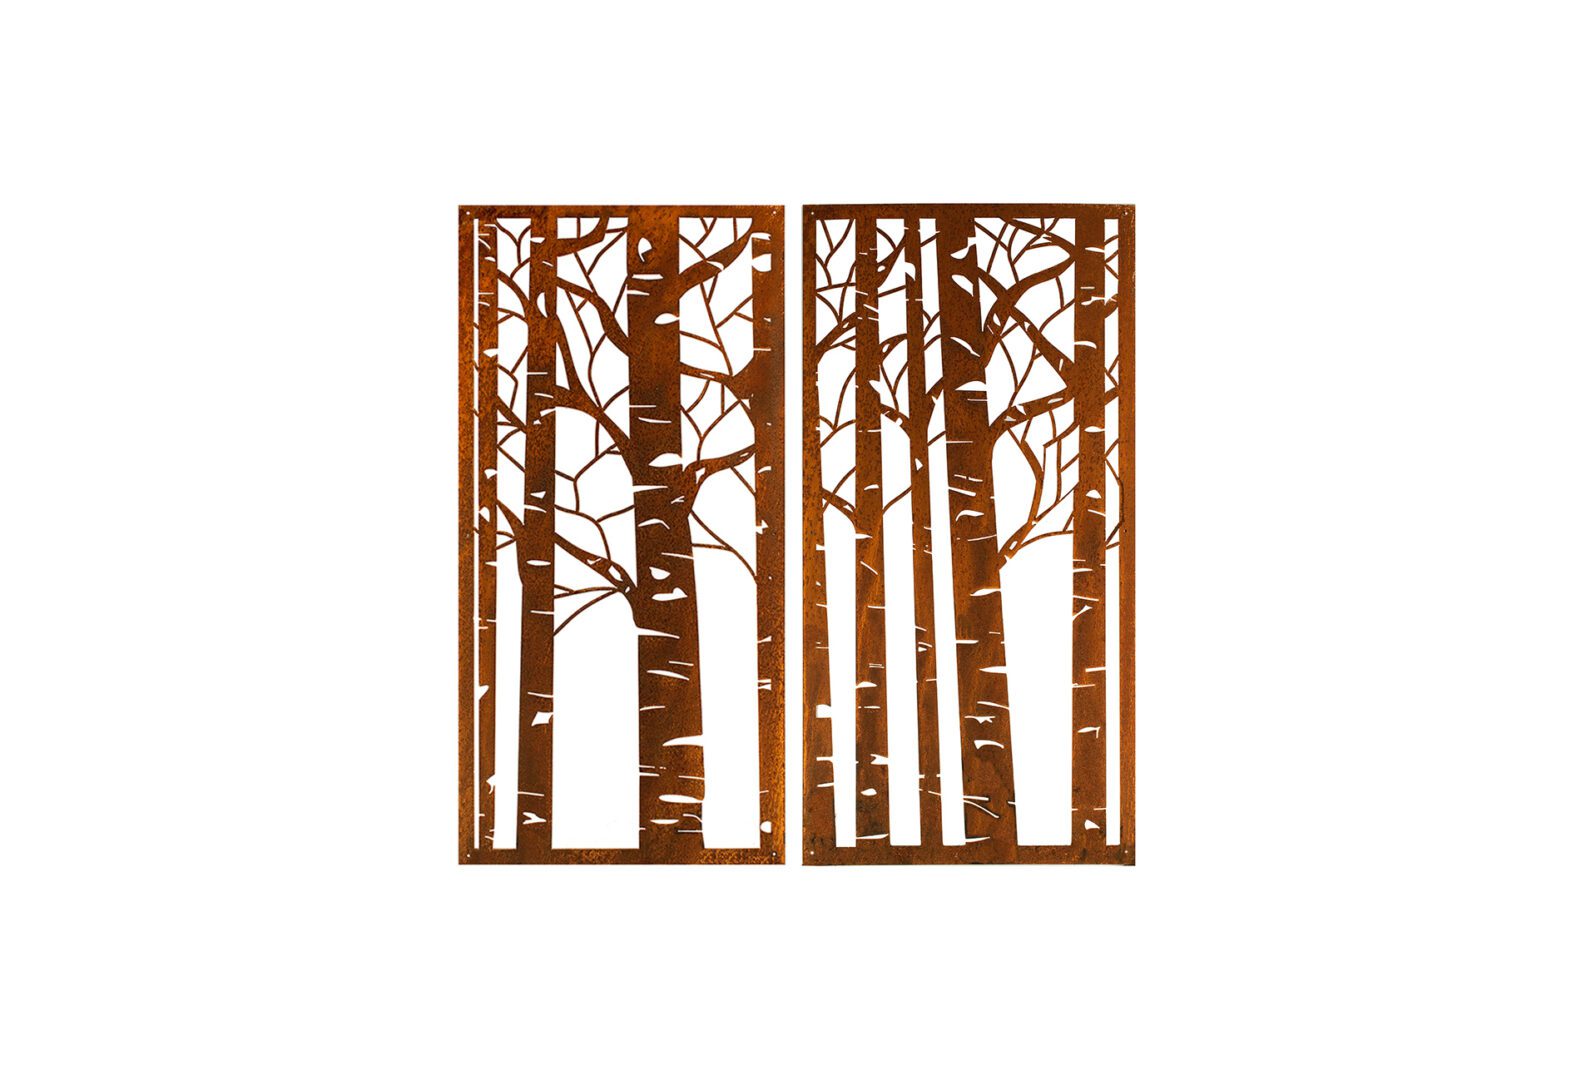 Birch Tree Forest Art Metal Privacy Screens with Birch Branches